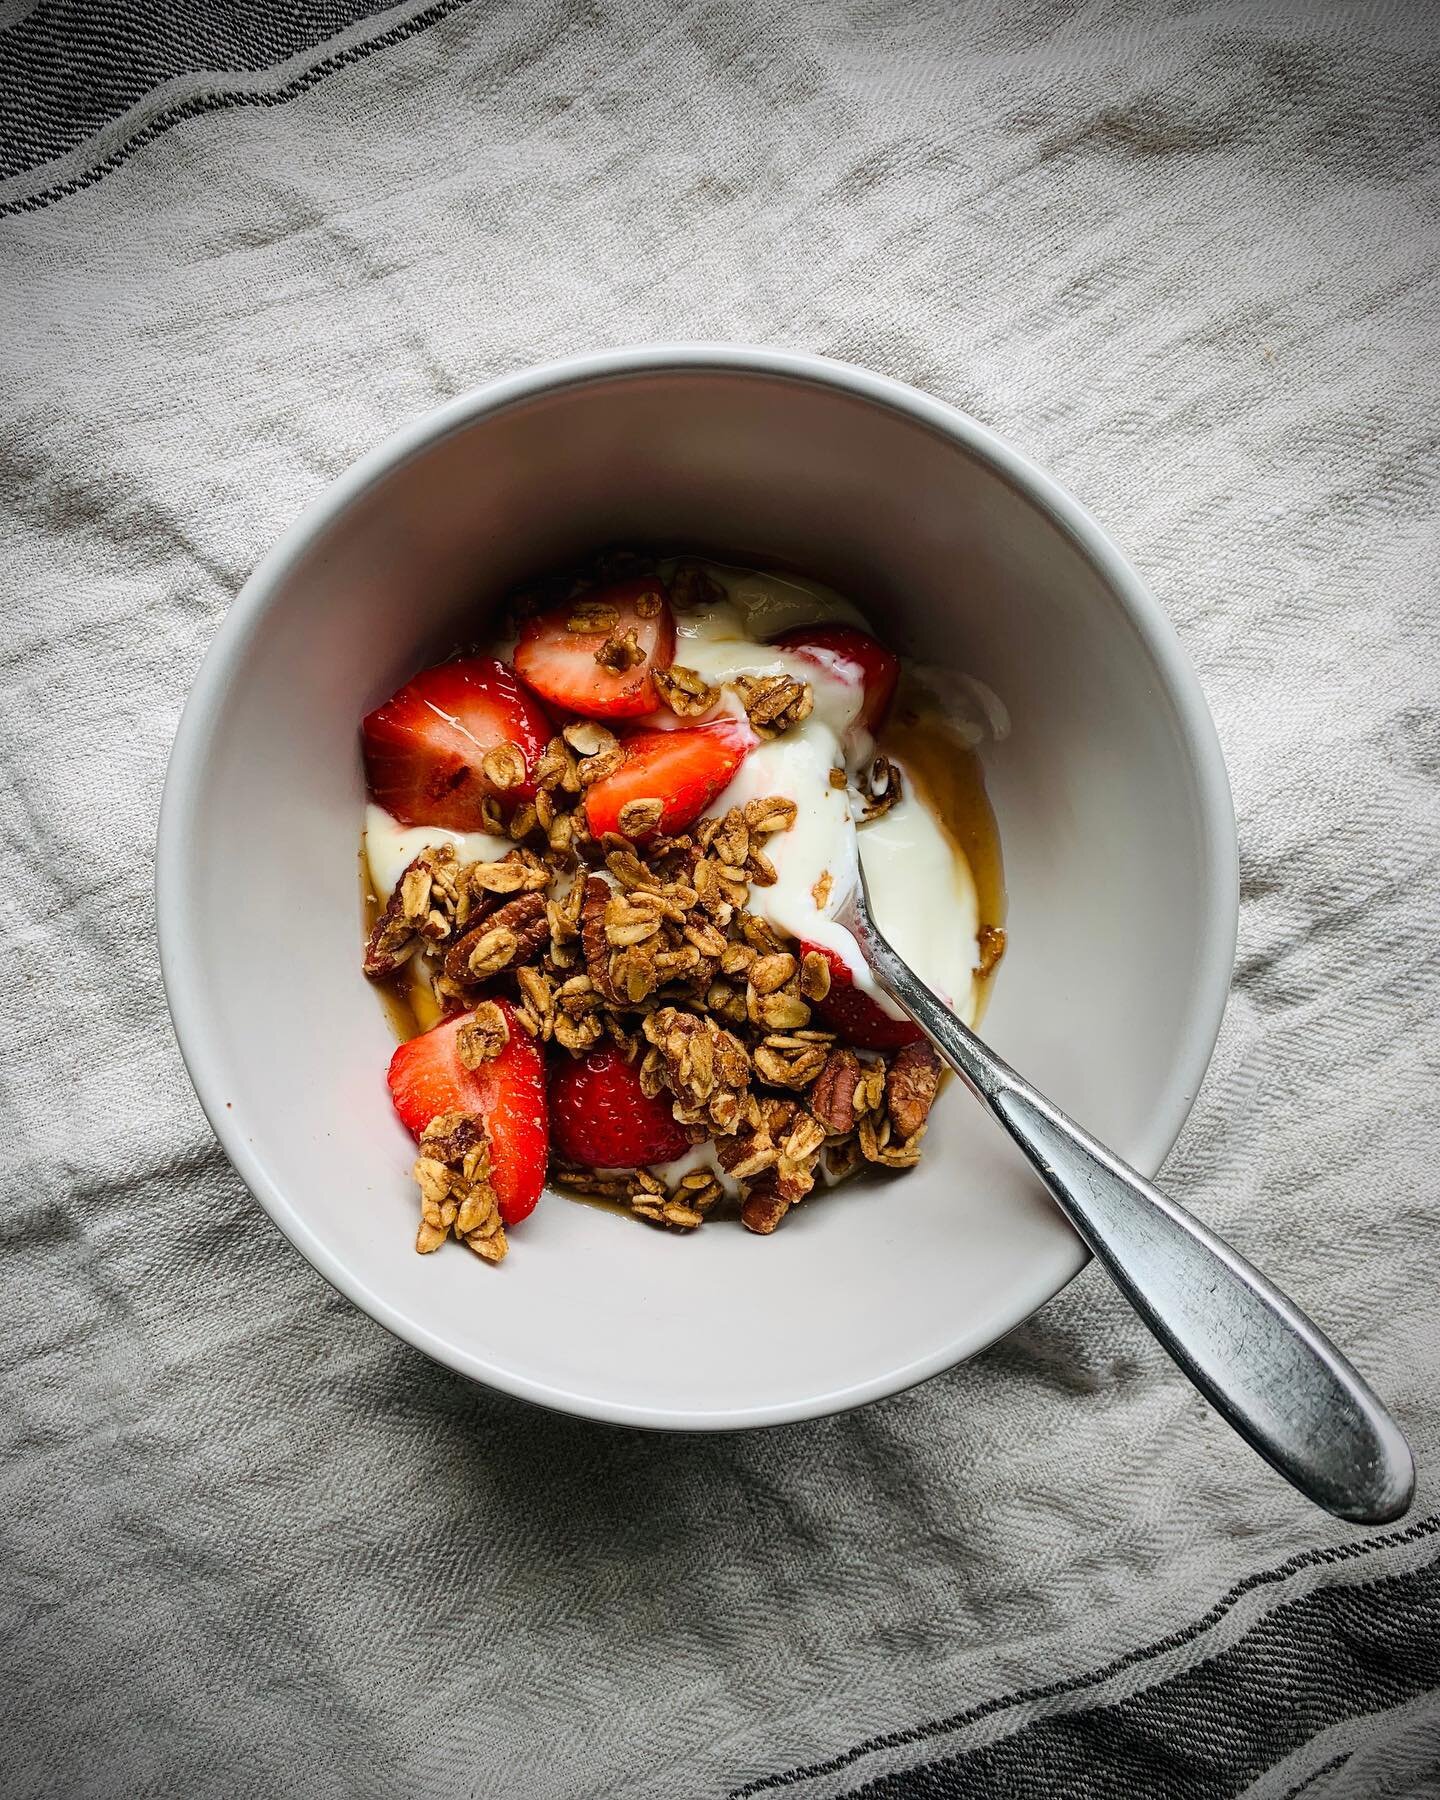 Heatwave update! I will be at @woodlawnfamersmarket tomorrow from 9am-noon. It will be about the only time of the day to enjoy the outdoors so I hope you can stop by for some Good Day Granola. Stock up on some fresh berries and granola then fix yours